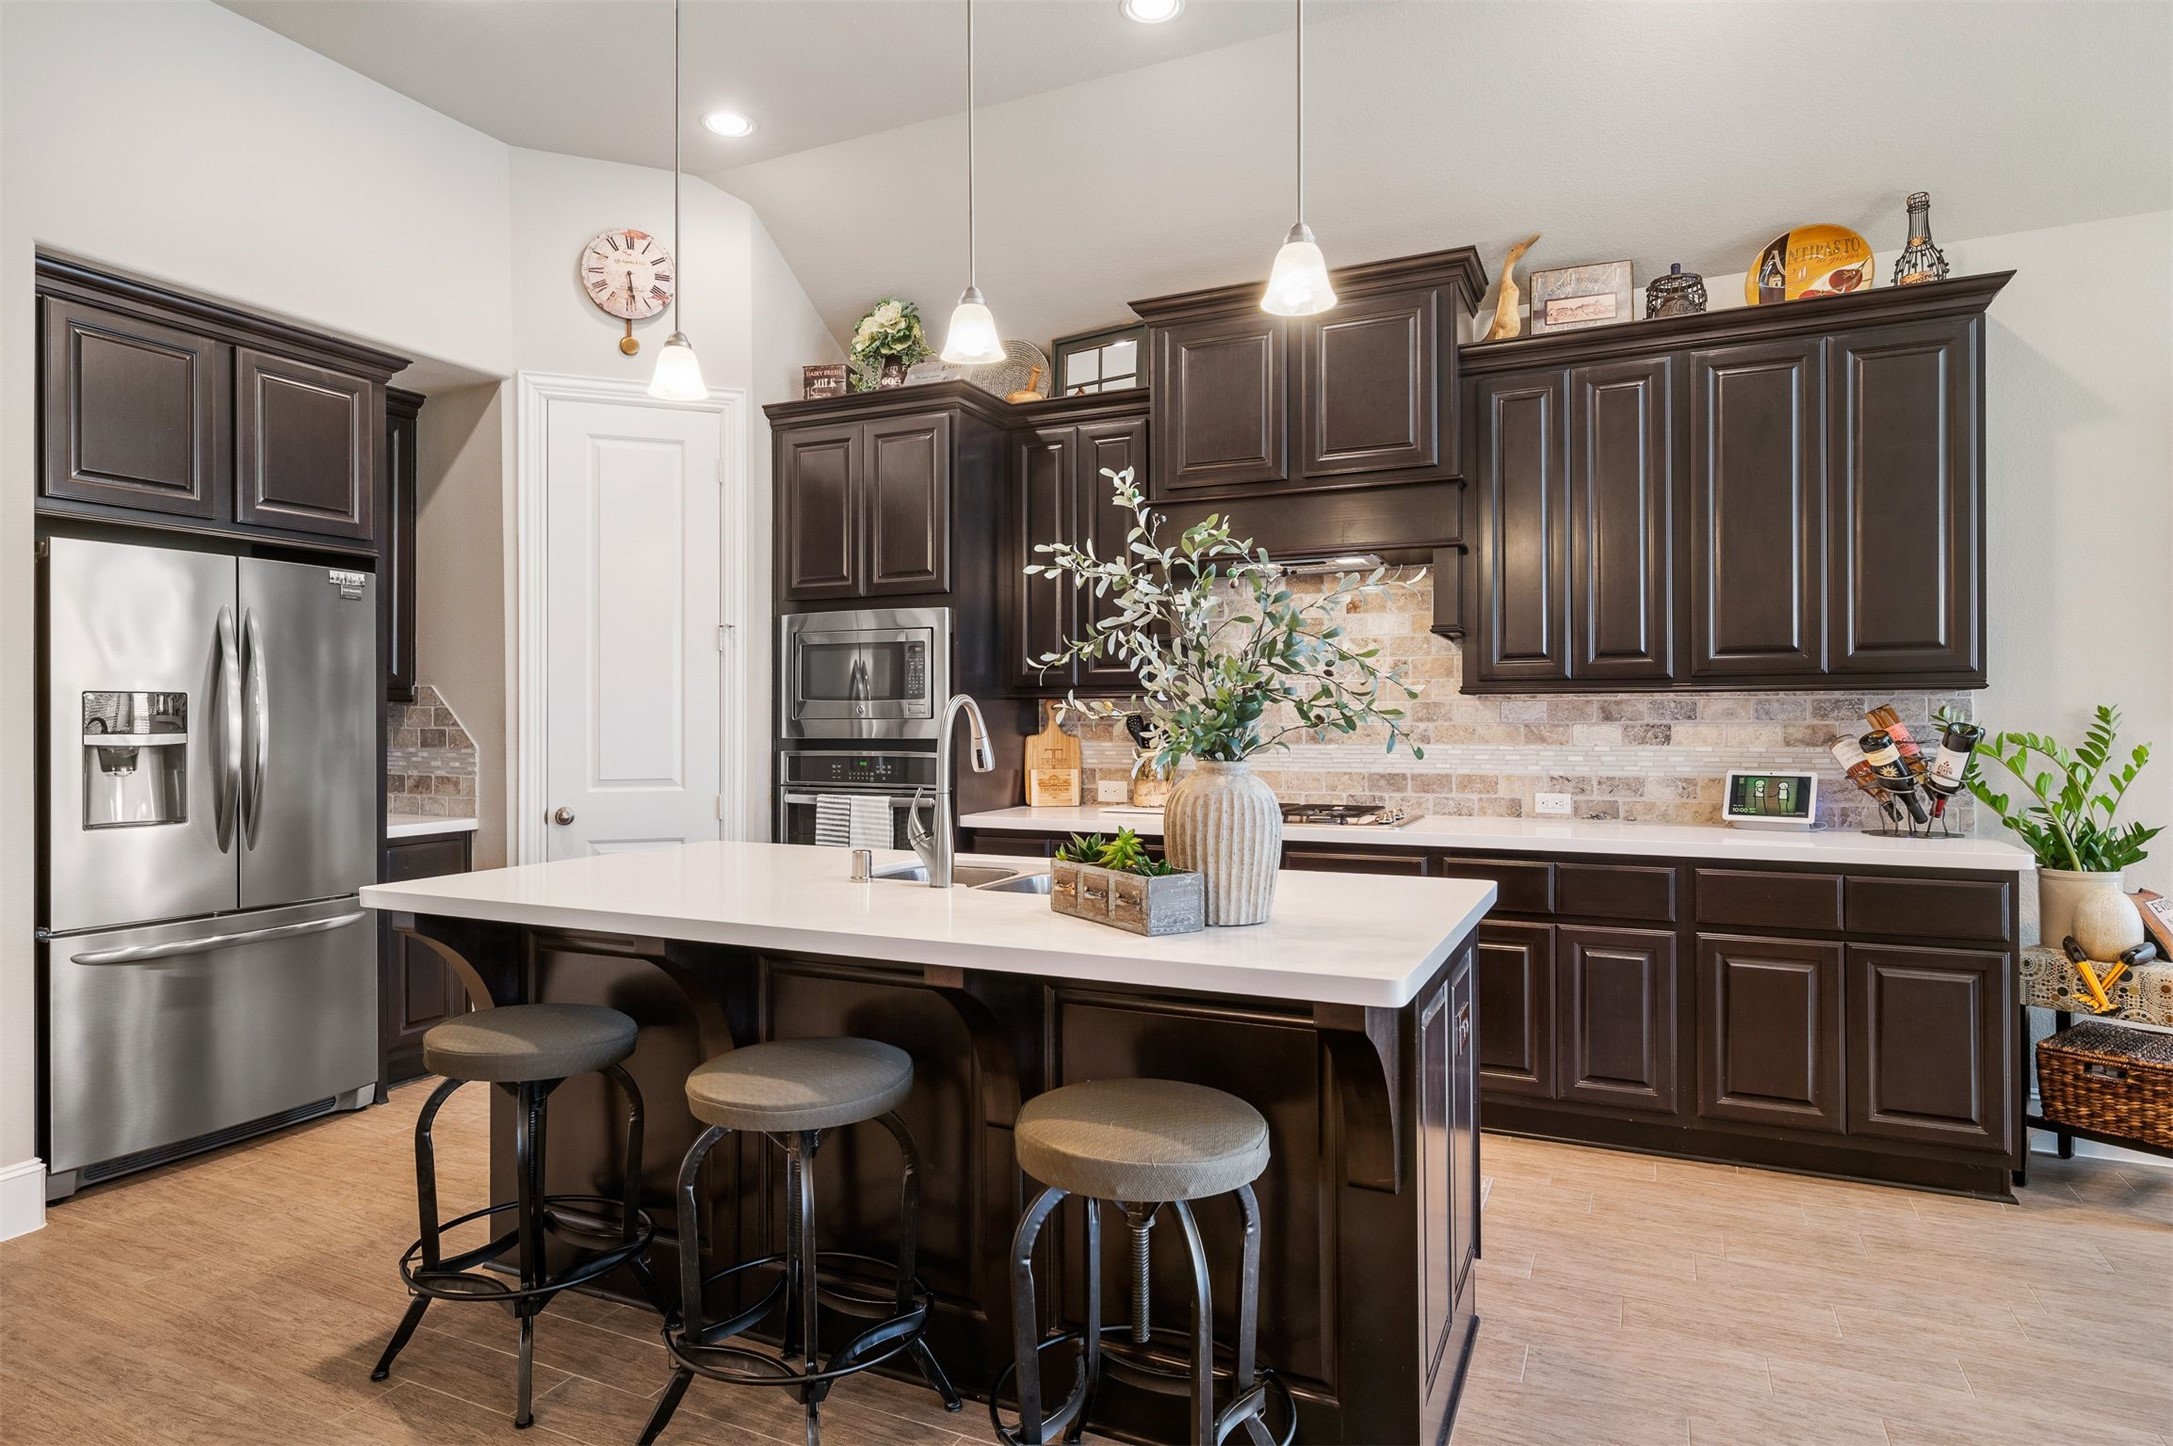 Lots of storage in this kitchen along with cabinets that go all the way up to the ceiling!